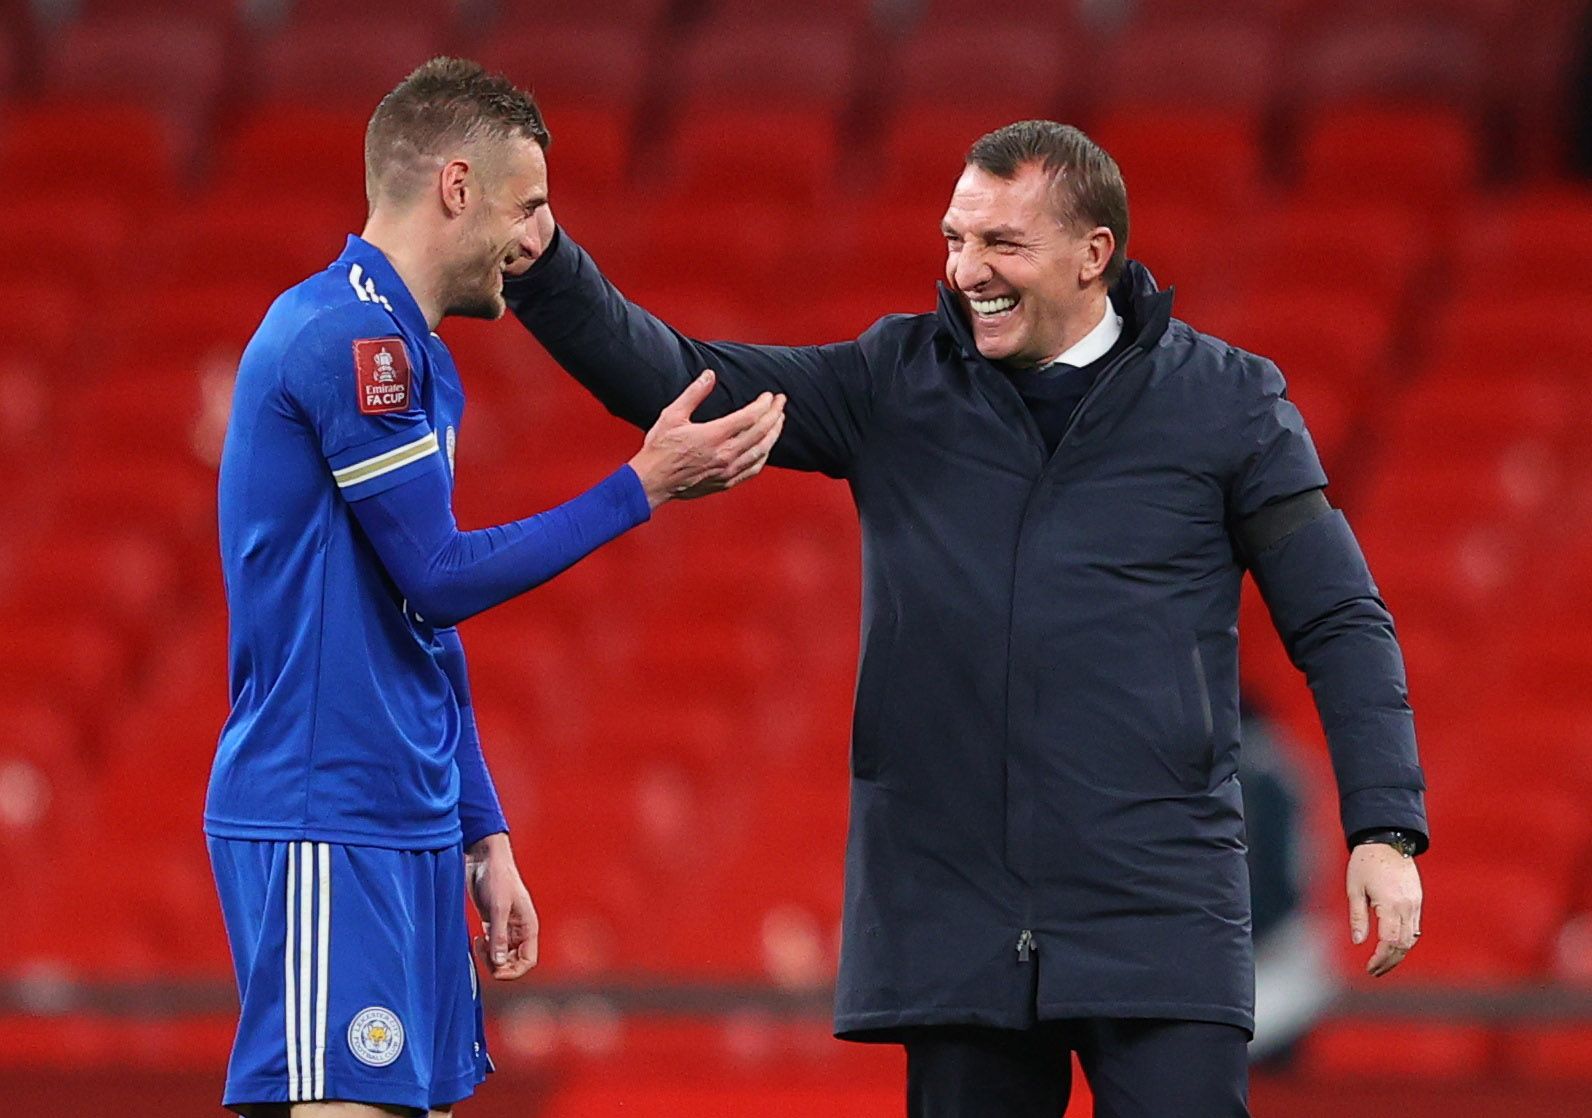 Soccer Football -  FA Cup Semi Final - Leicester City v Southampton  - Wembley Stadium, London, Britain - April 18, 2021 Leicester City's Jamie Vardy and manager Brendan Rodgers celebrate after the match Pool via REUTERS/Richard Heathcote